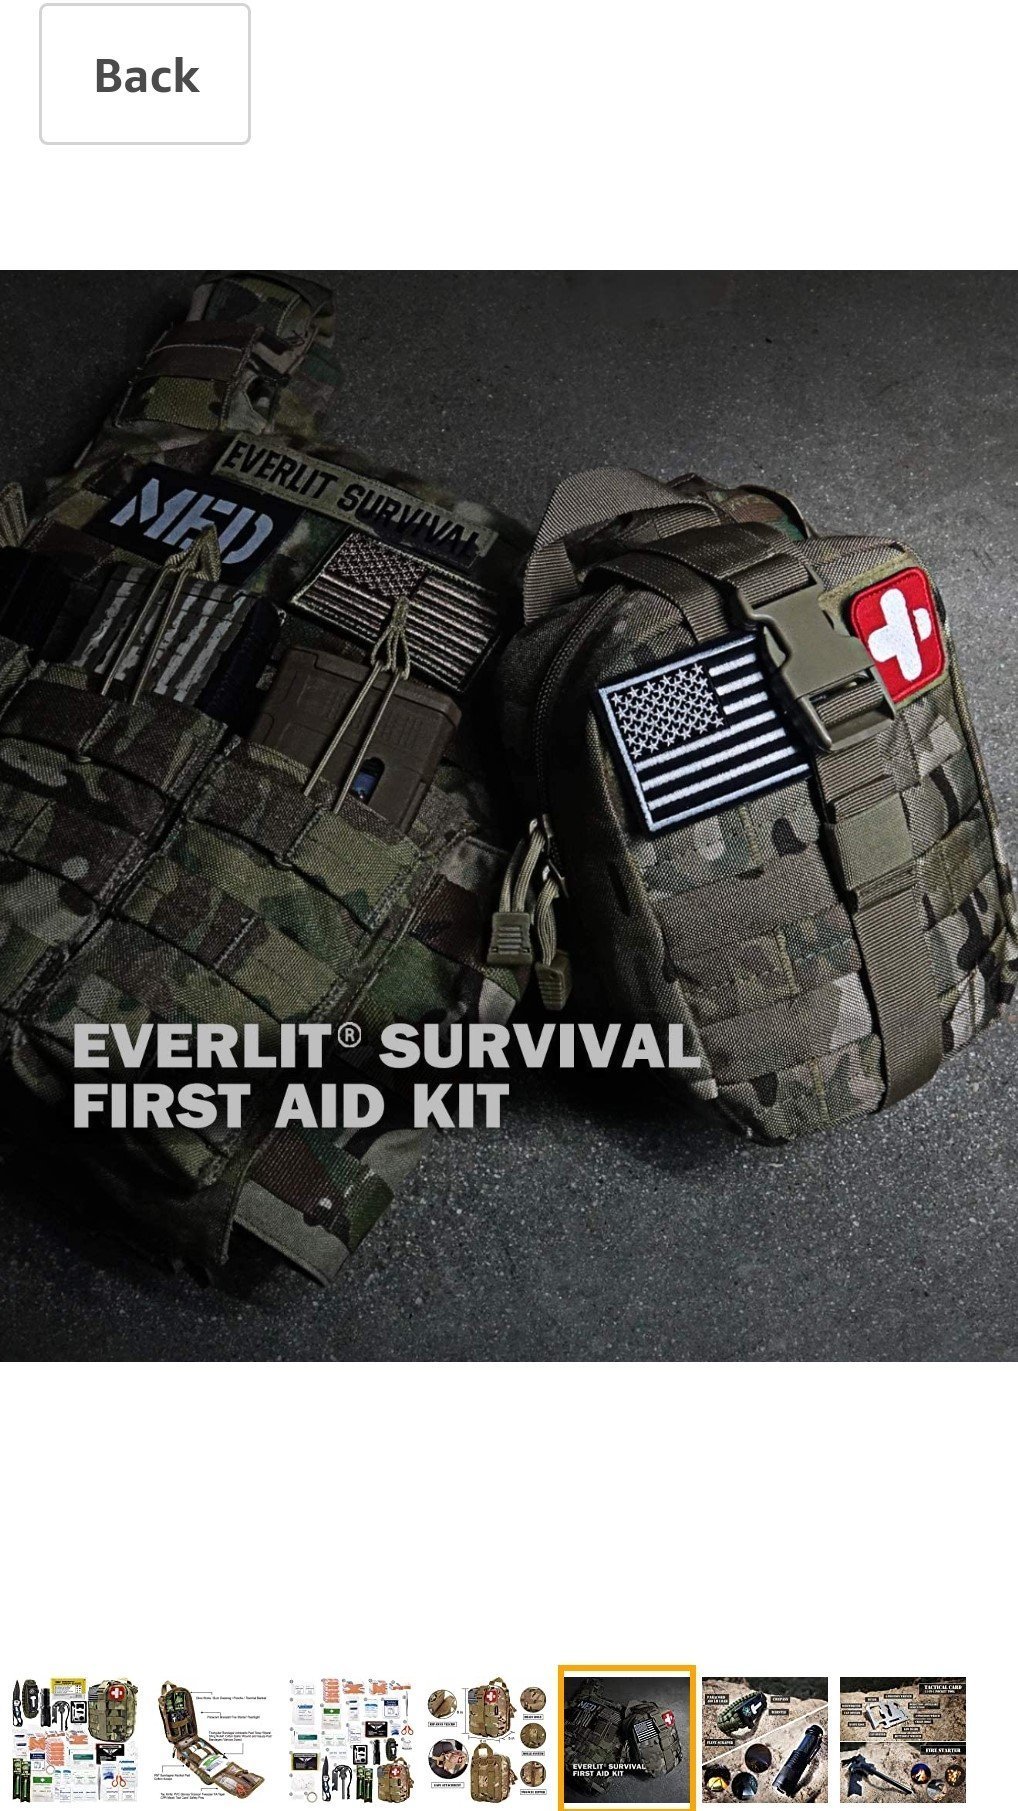 Everlit First Aid Survival Backpack Giveaway